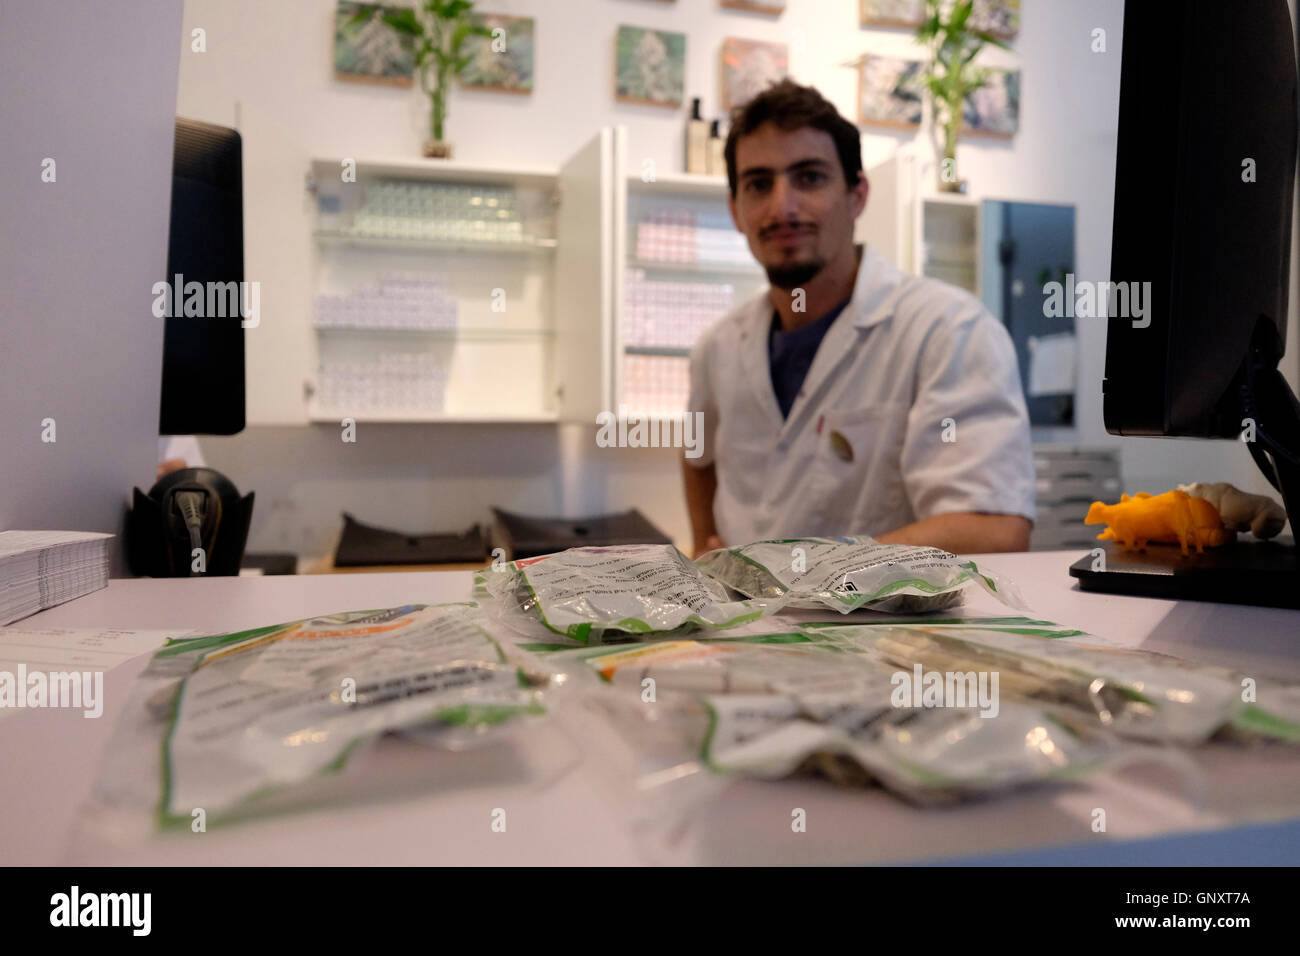 Bags containing medical marijuana is seen at a dispensary belonging to Tikun Olam, Israel's largest medical marijuana supplier in Tel Aviv on 01 September 2016. Israel is emerging as a world leader on the science of medical marijuana. In June, Israel approved a plan to ease restrictions on growing medical marijuana and announced that medical marijuana would eventually become a major growth and export industry. Stock Photo